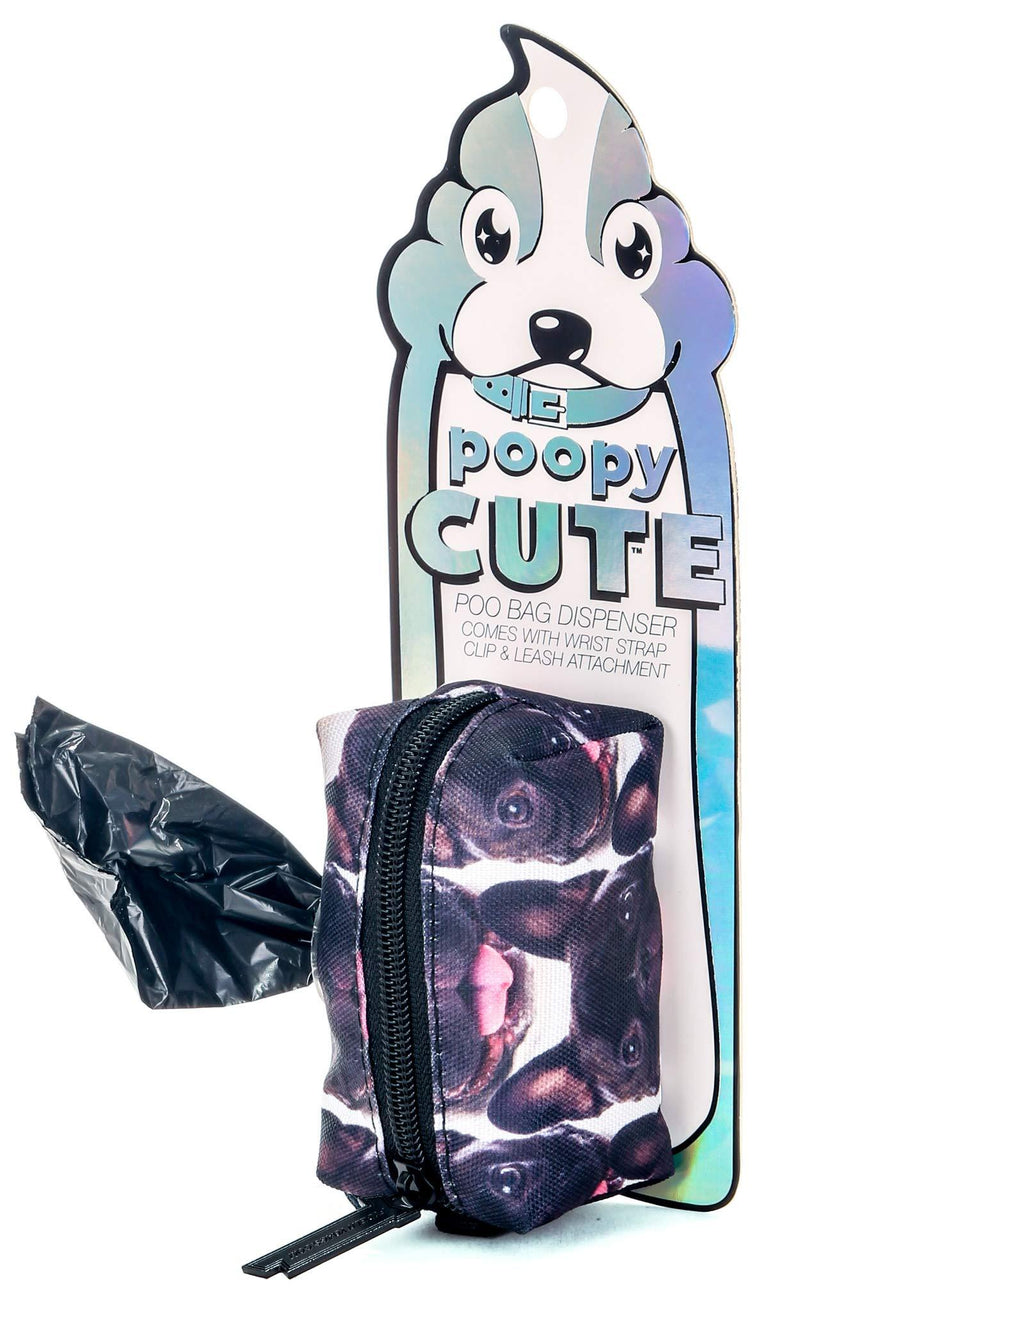 [Australia] - Fydelity poopyCUTE- Doggy Poop Waste Bag Dispenser for Fashionably Cute Owner and Dog Breed,Puppy Supply|Women Luxury Fashion Style, On Leash Holder Clip for Bag/Travel/Walking/Treat/Key FYDELITY- PoopyCute- POOCHIFER French Bull Dog Black 